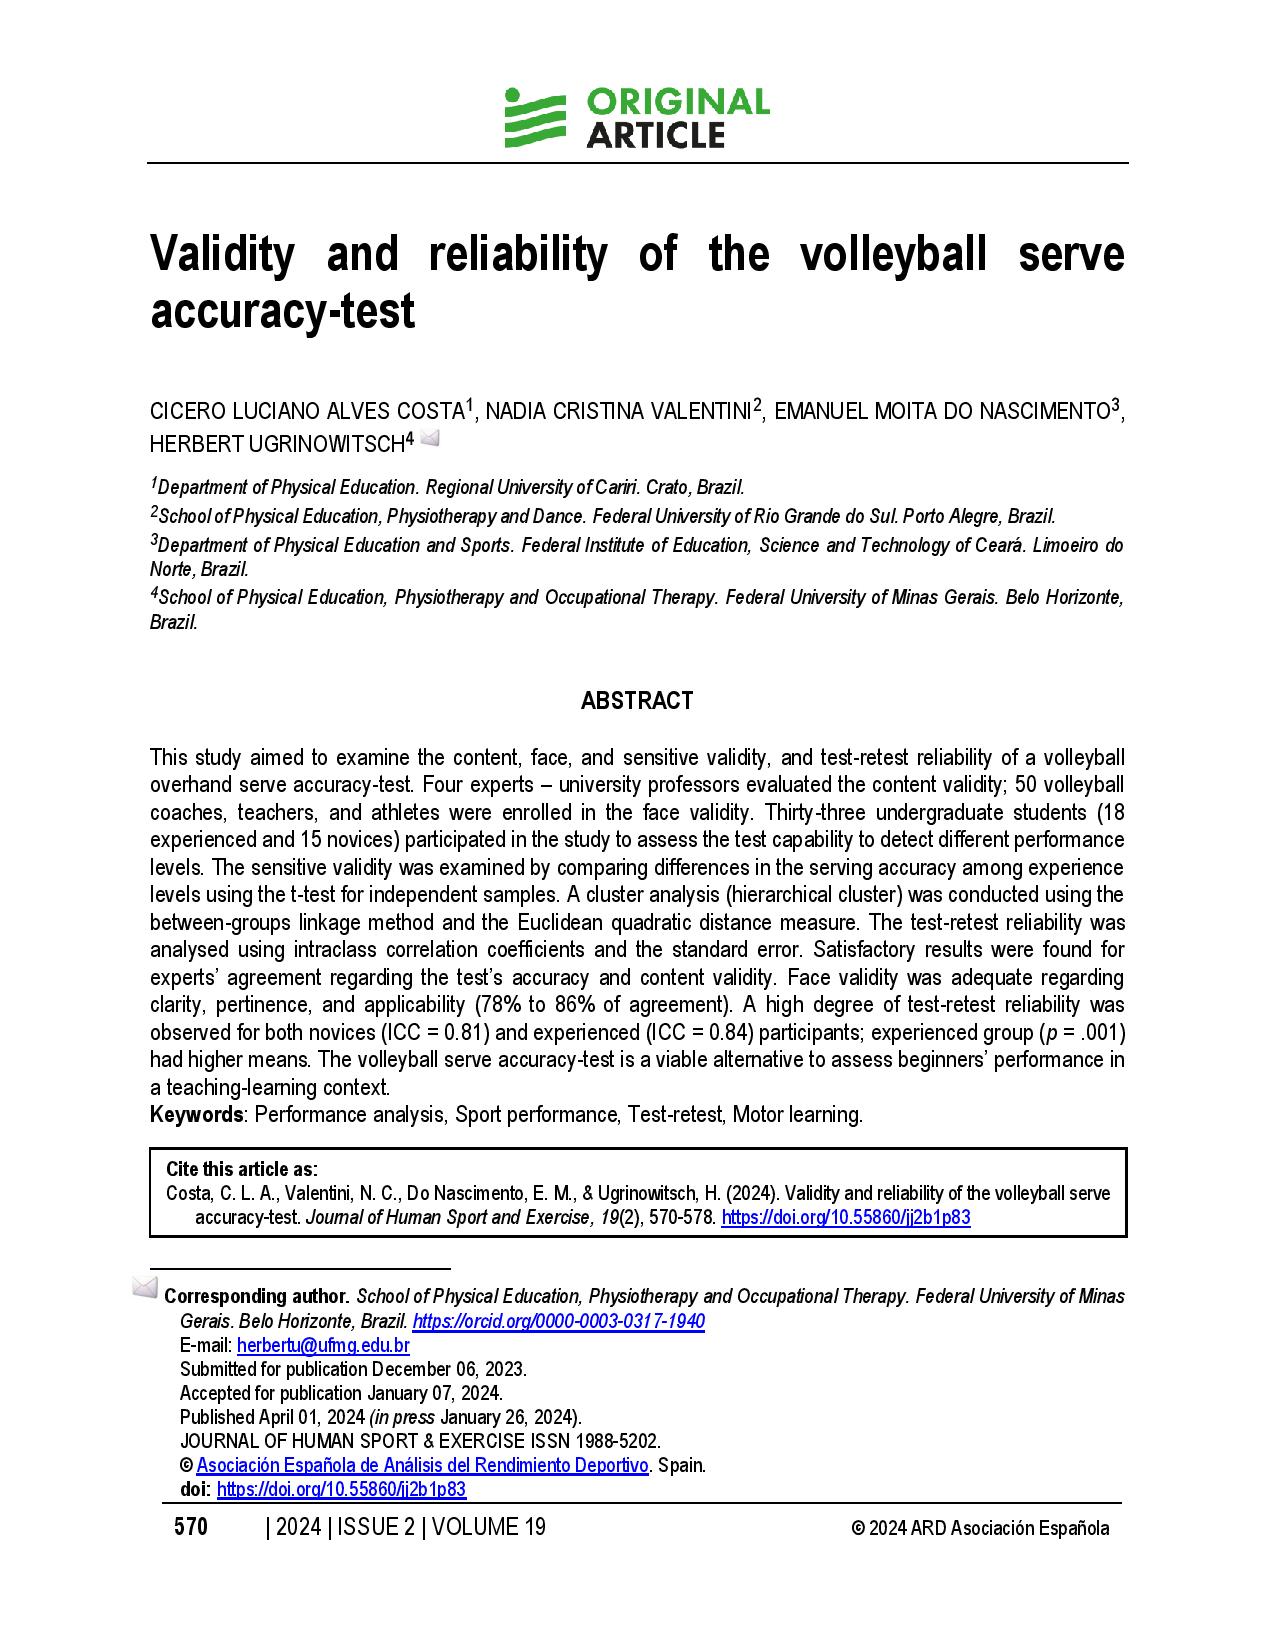 Validity and reliability of the volleyball serve accuracy-test